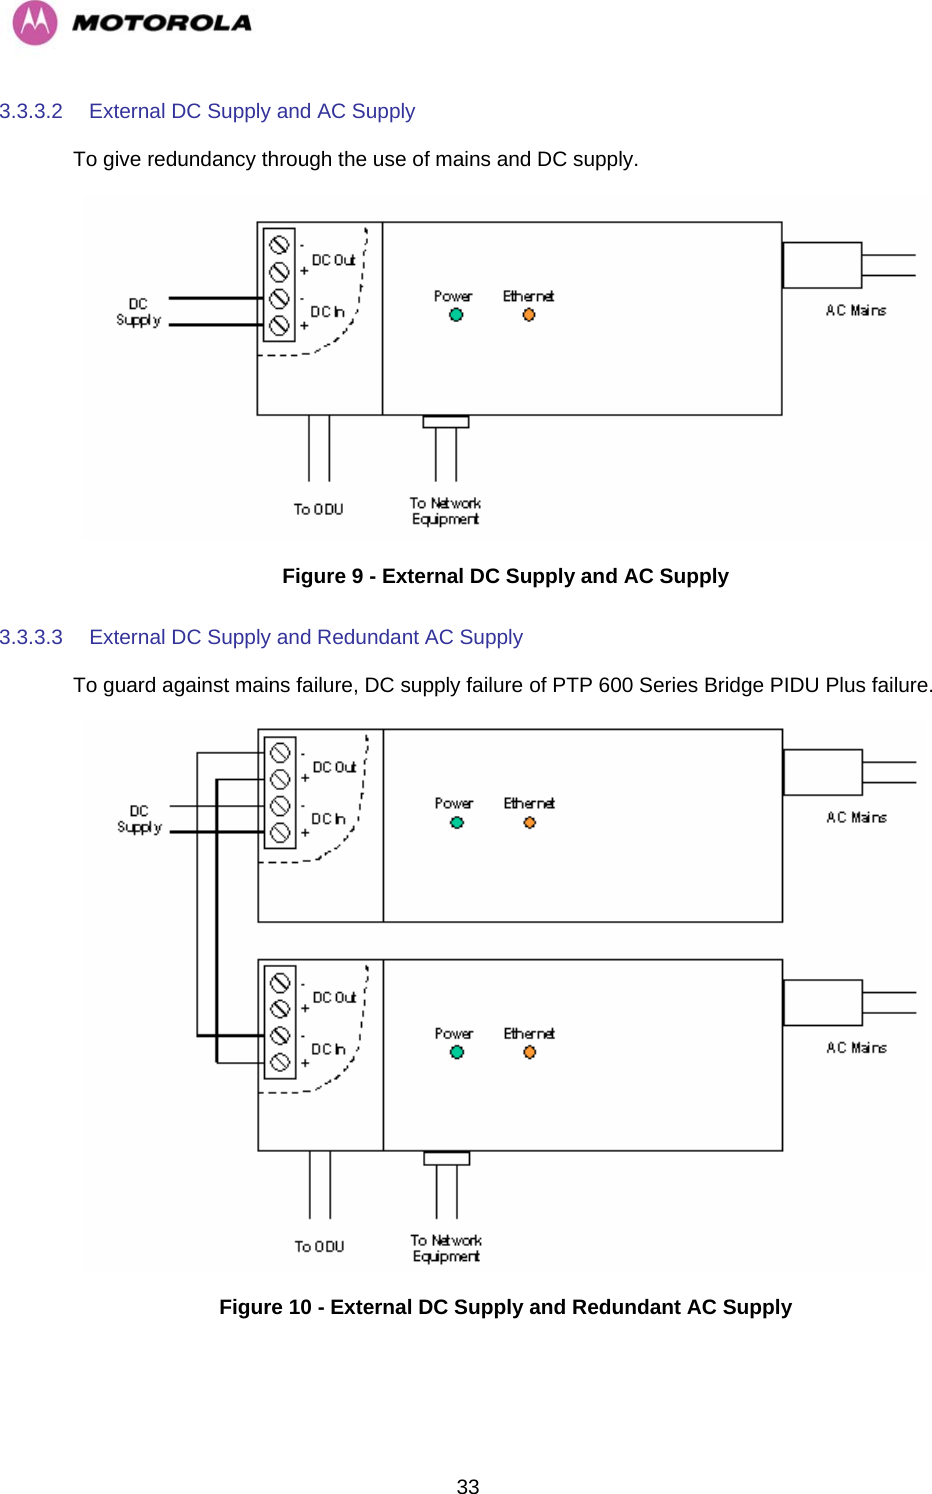   333.3.3.2  External DC Supply and AC Supply To give redundancy through the use of mains and DC supply.  Figure 9 - External DC Supply and AC Supply 3.3.3.3  External DC Supply and Redundant AC Supply To guard against mains failure, DC supply failure of PTP 600 Series Bridge PIDU Plus failure.  Figure 10 - External DC Supply and Redundant AC Supply 